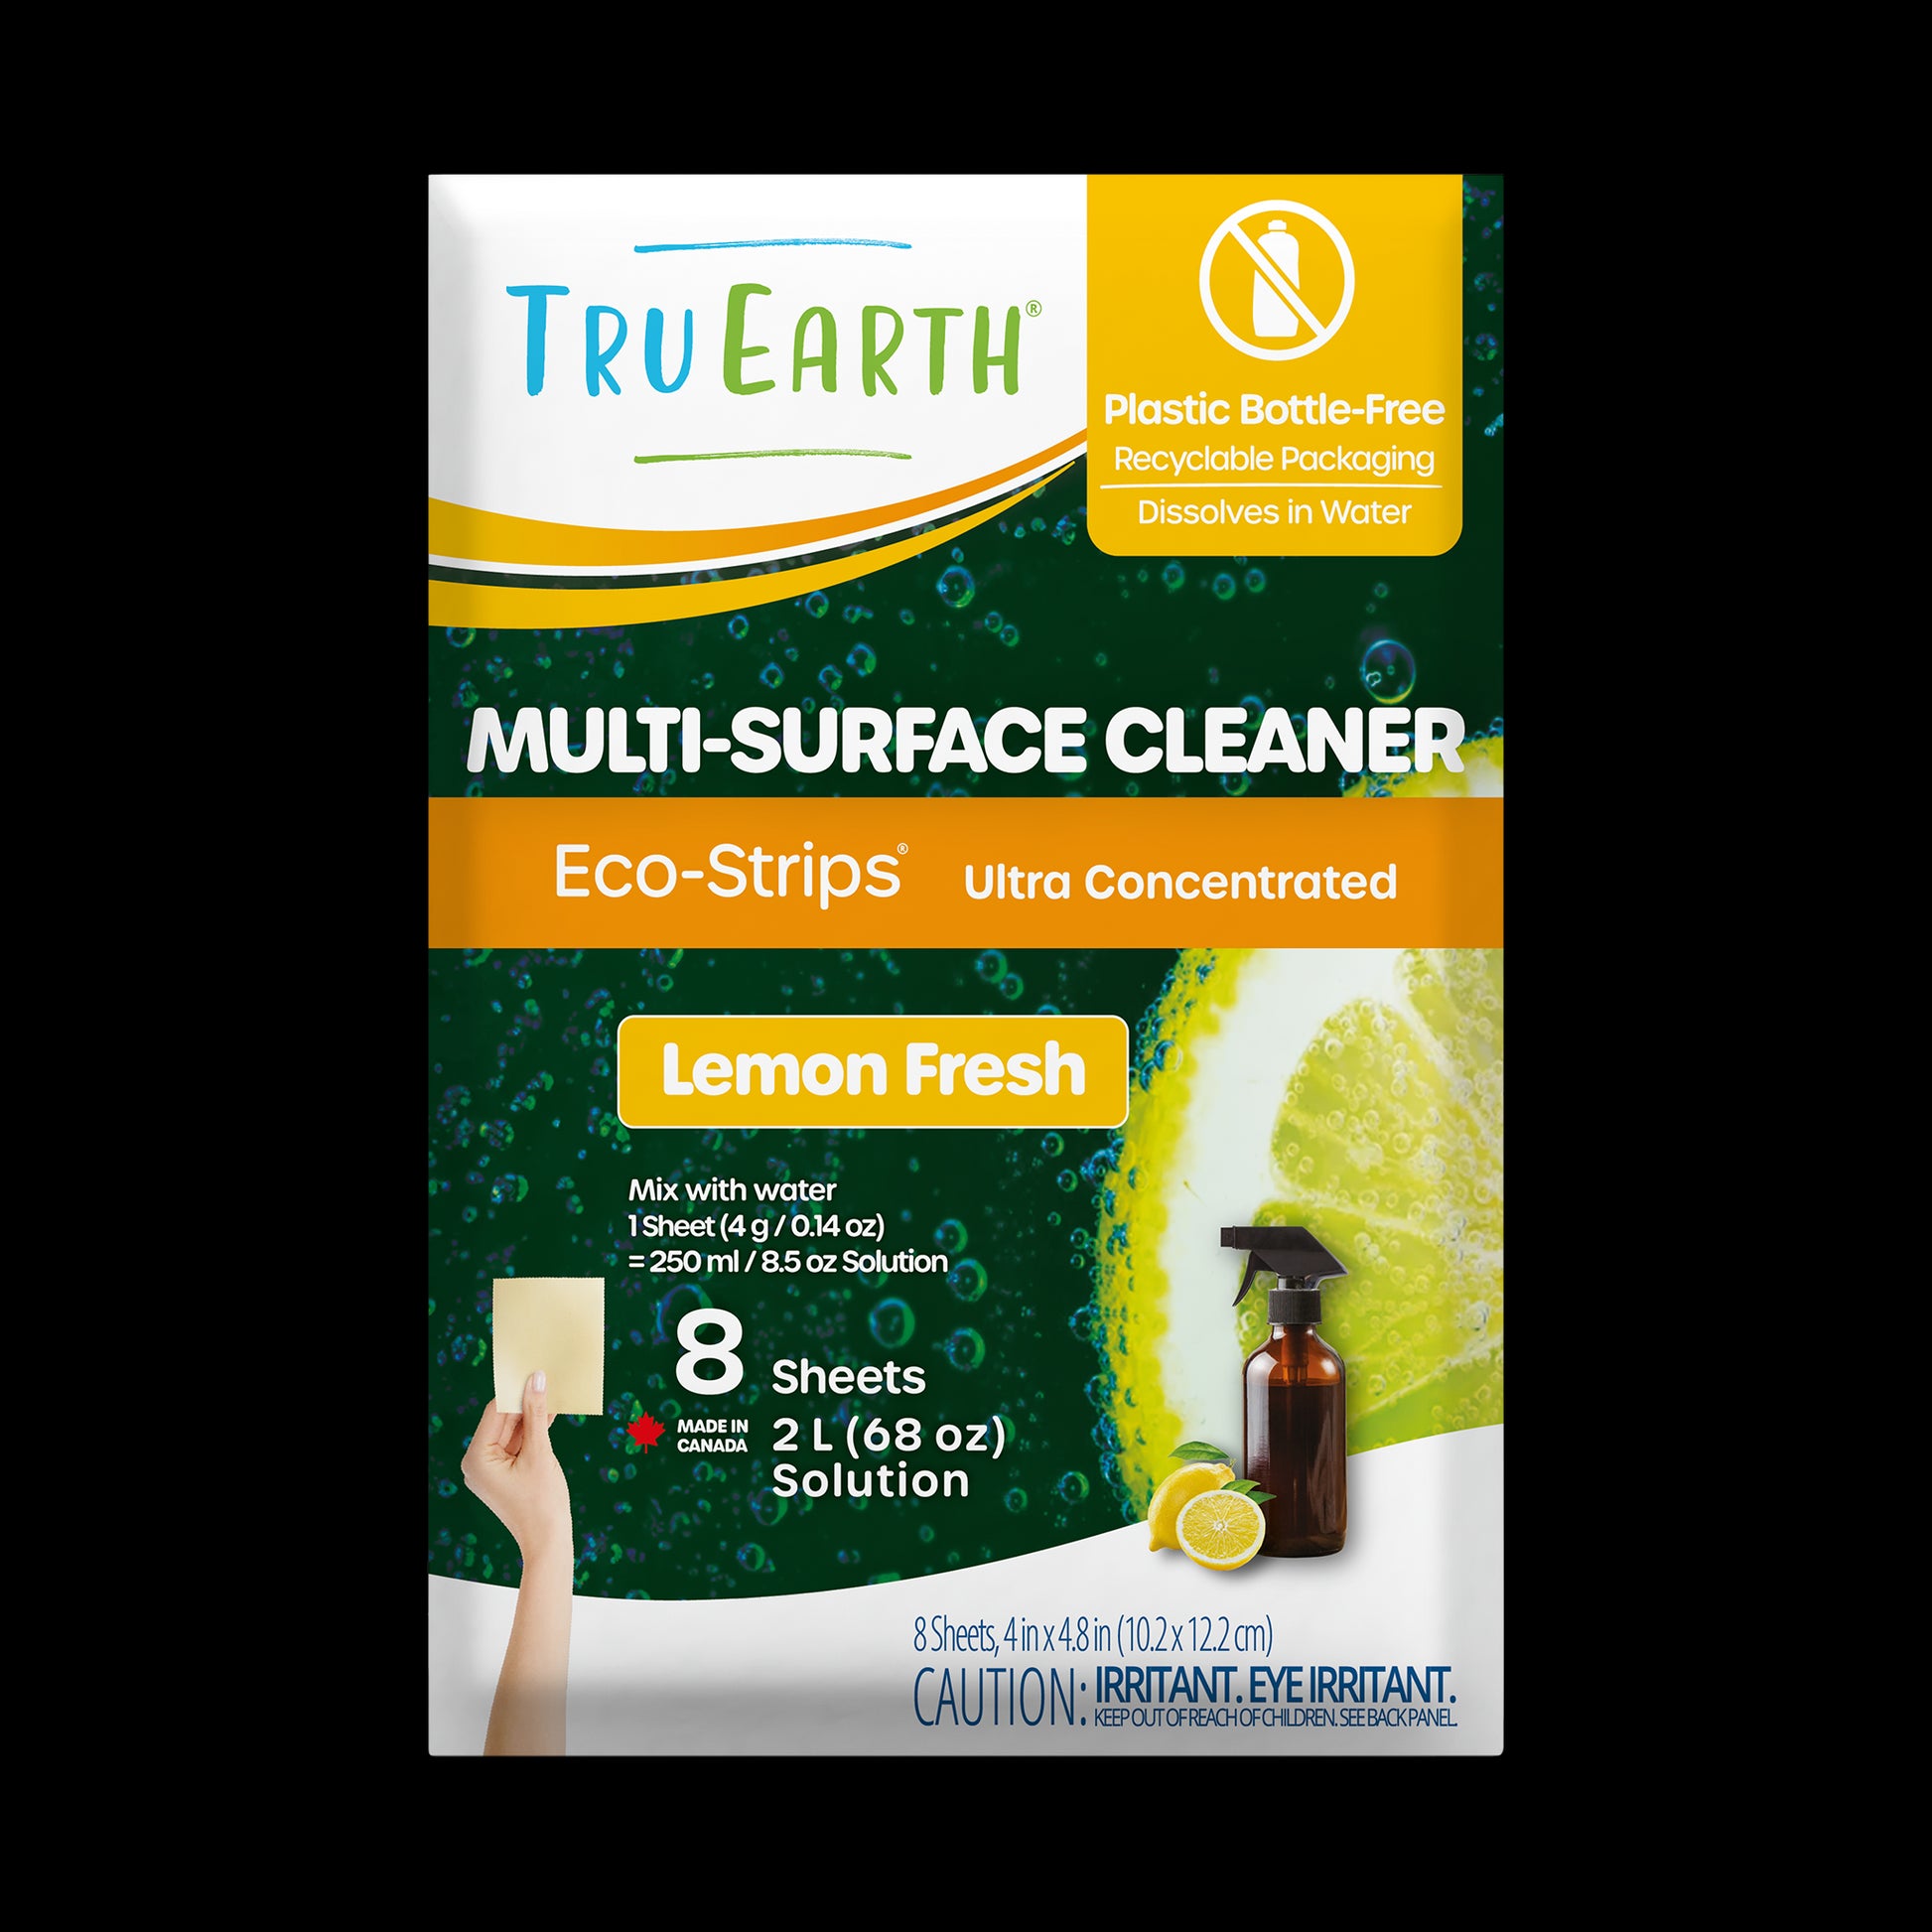 TruEarth Multi-Surface Cleaner Front of Package